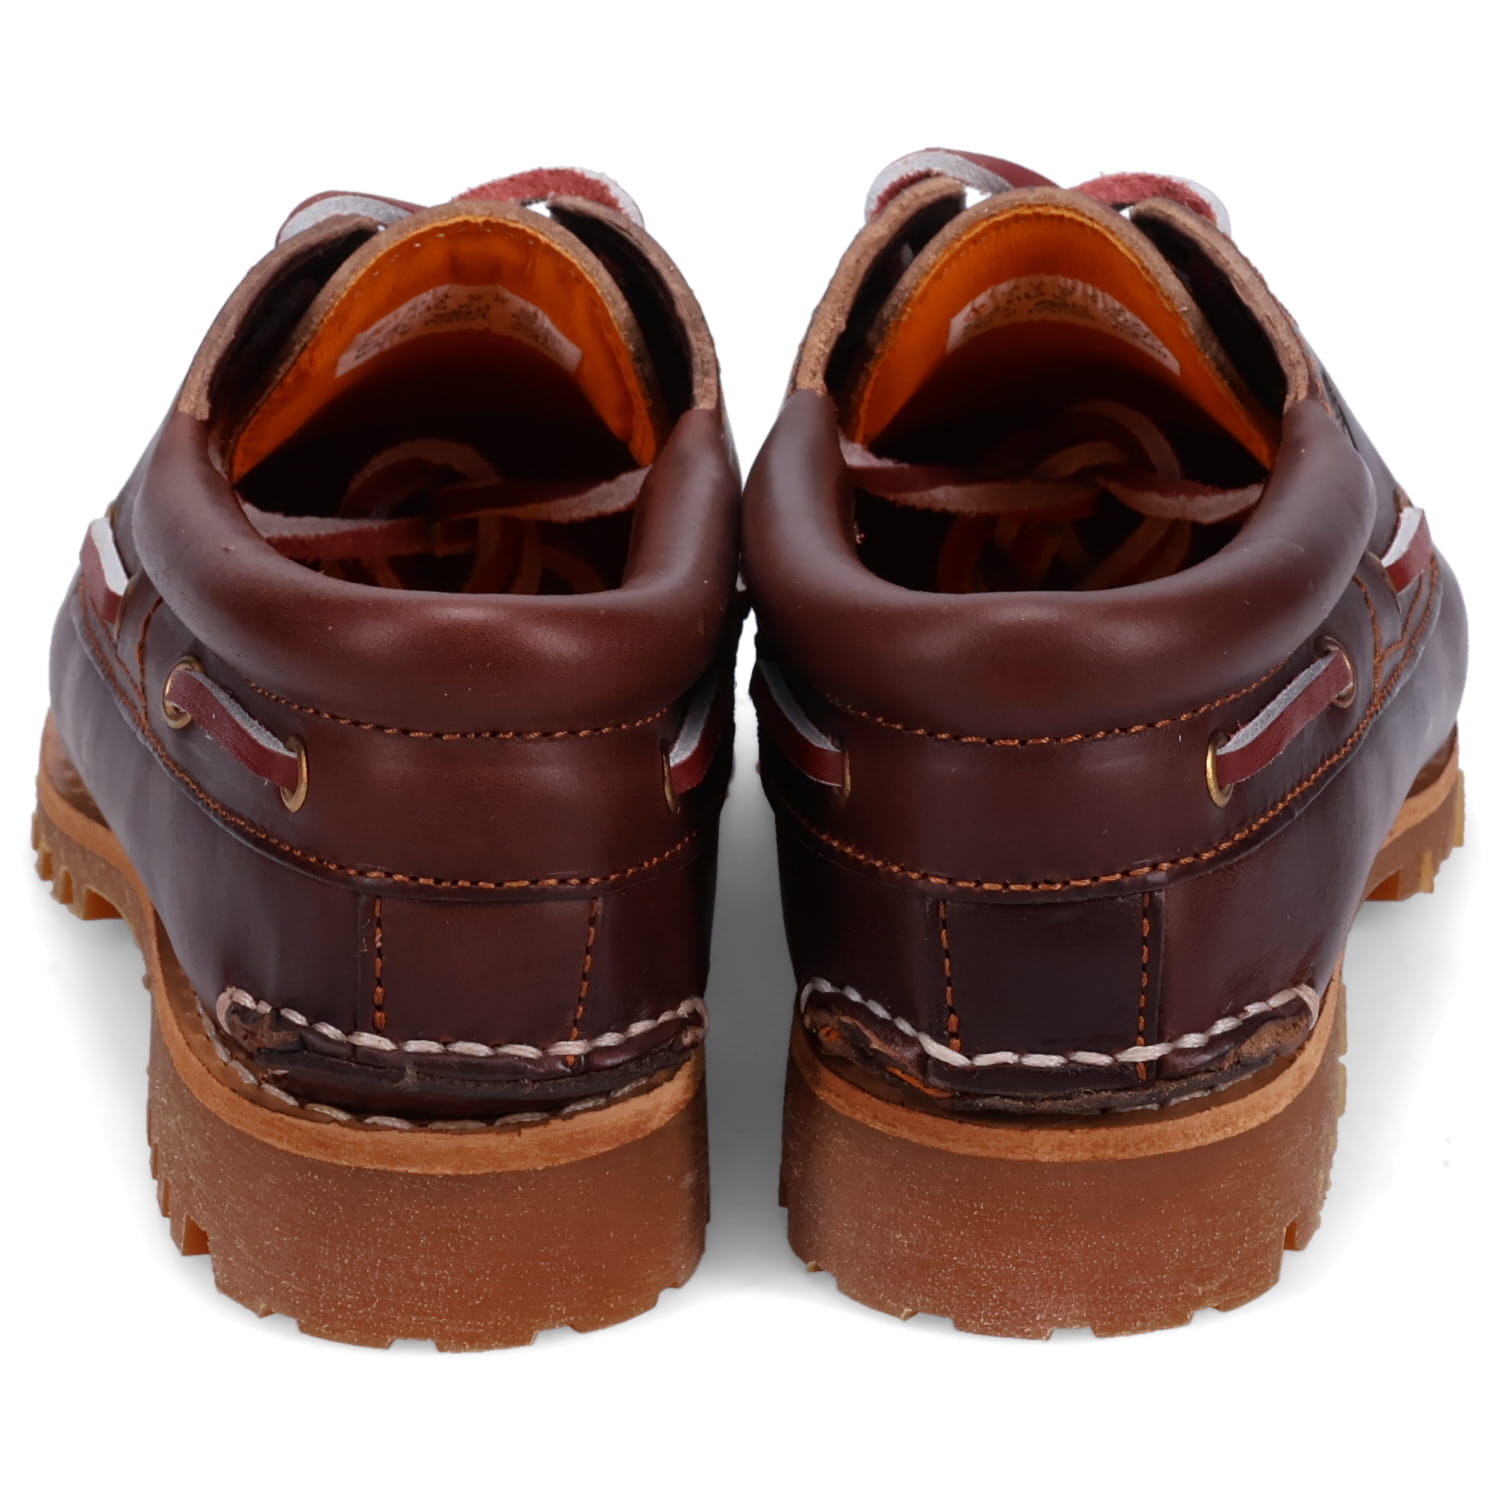 Timberland Timberland deck shoes женский HERITAGE NOREEN 3 EYE HANDSEWN Brown 51304